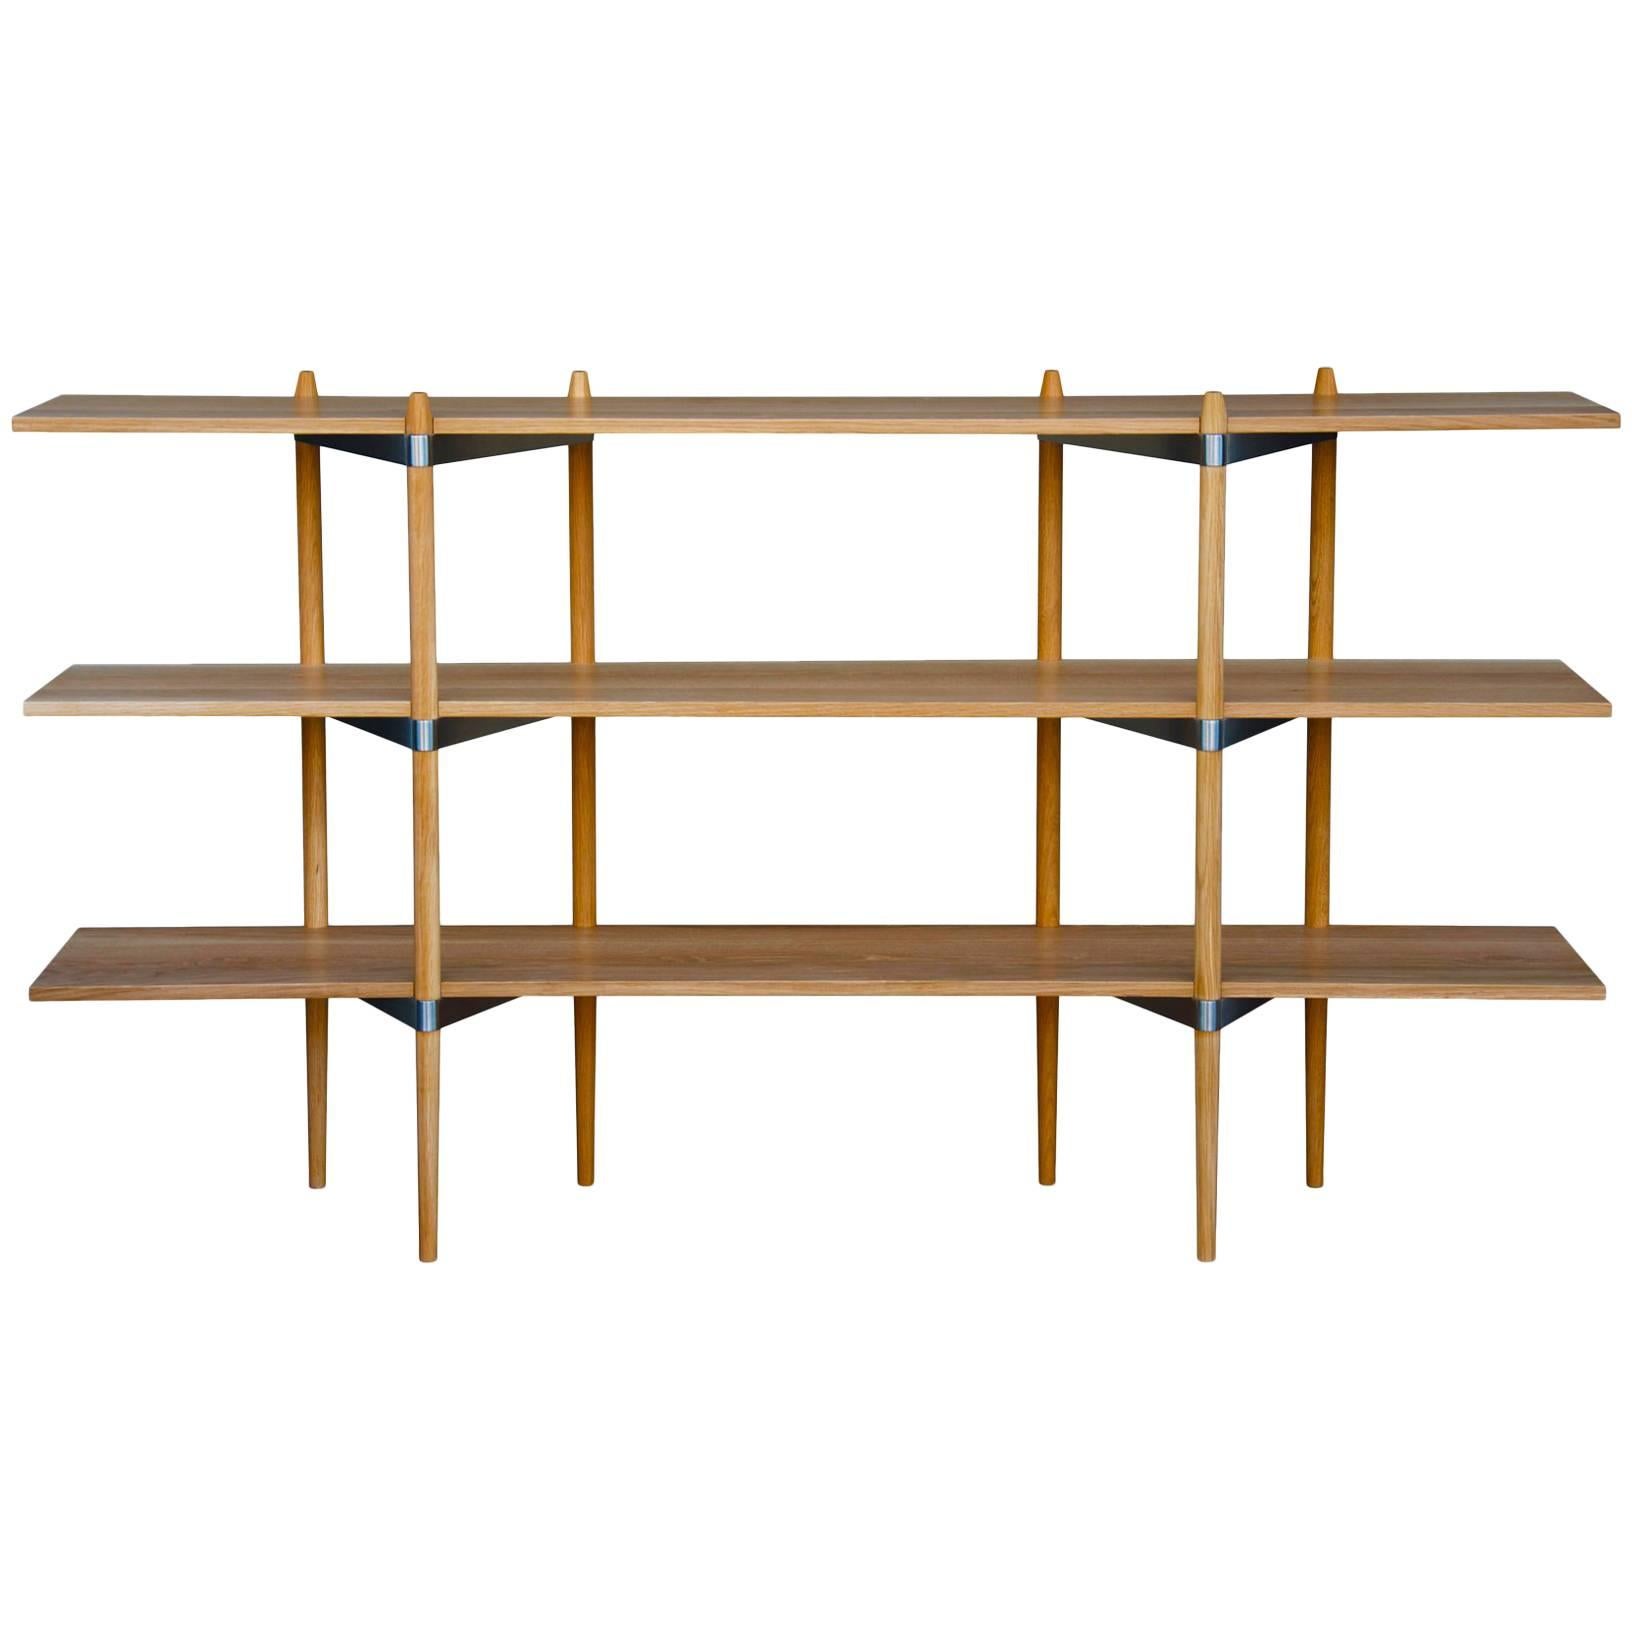 Casey Lurie Modern Low "Primo" Shelving System in White Oak with Stainless Steel